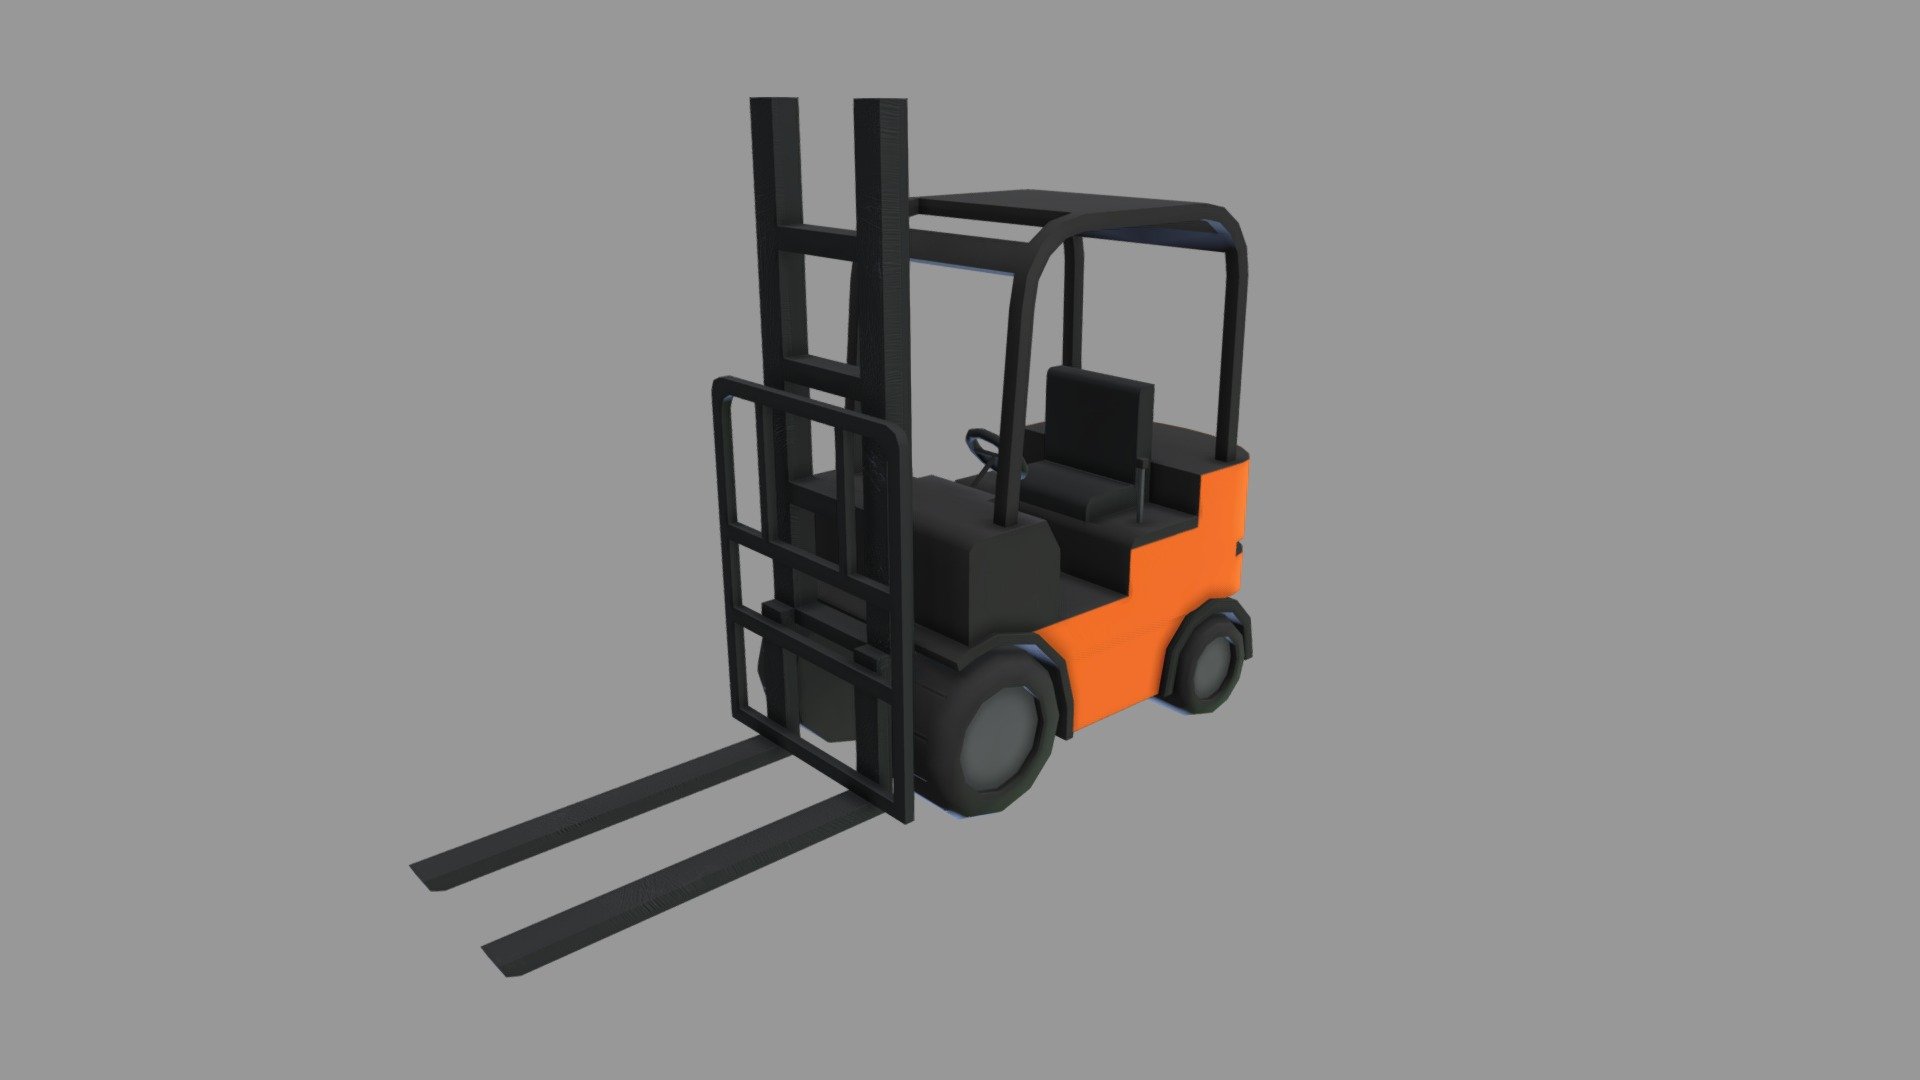 Model of an orange-black cartoon forklift.

Poly: 1,264
Vertex: 1,284
in subdivision level 0

4096x4096 JPG Texture
Include Diffuse and Normal

3ds max,FBX,OBJ and texture files in additional file 3d model